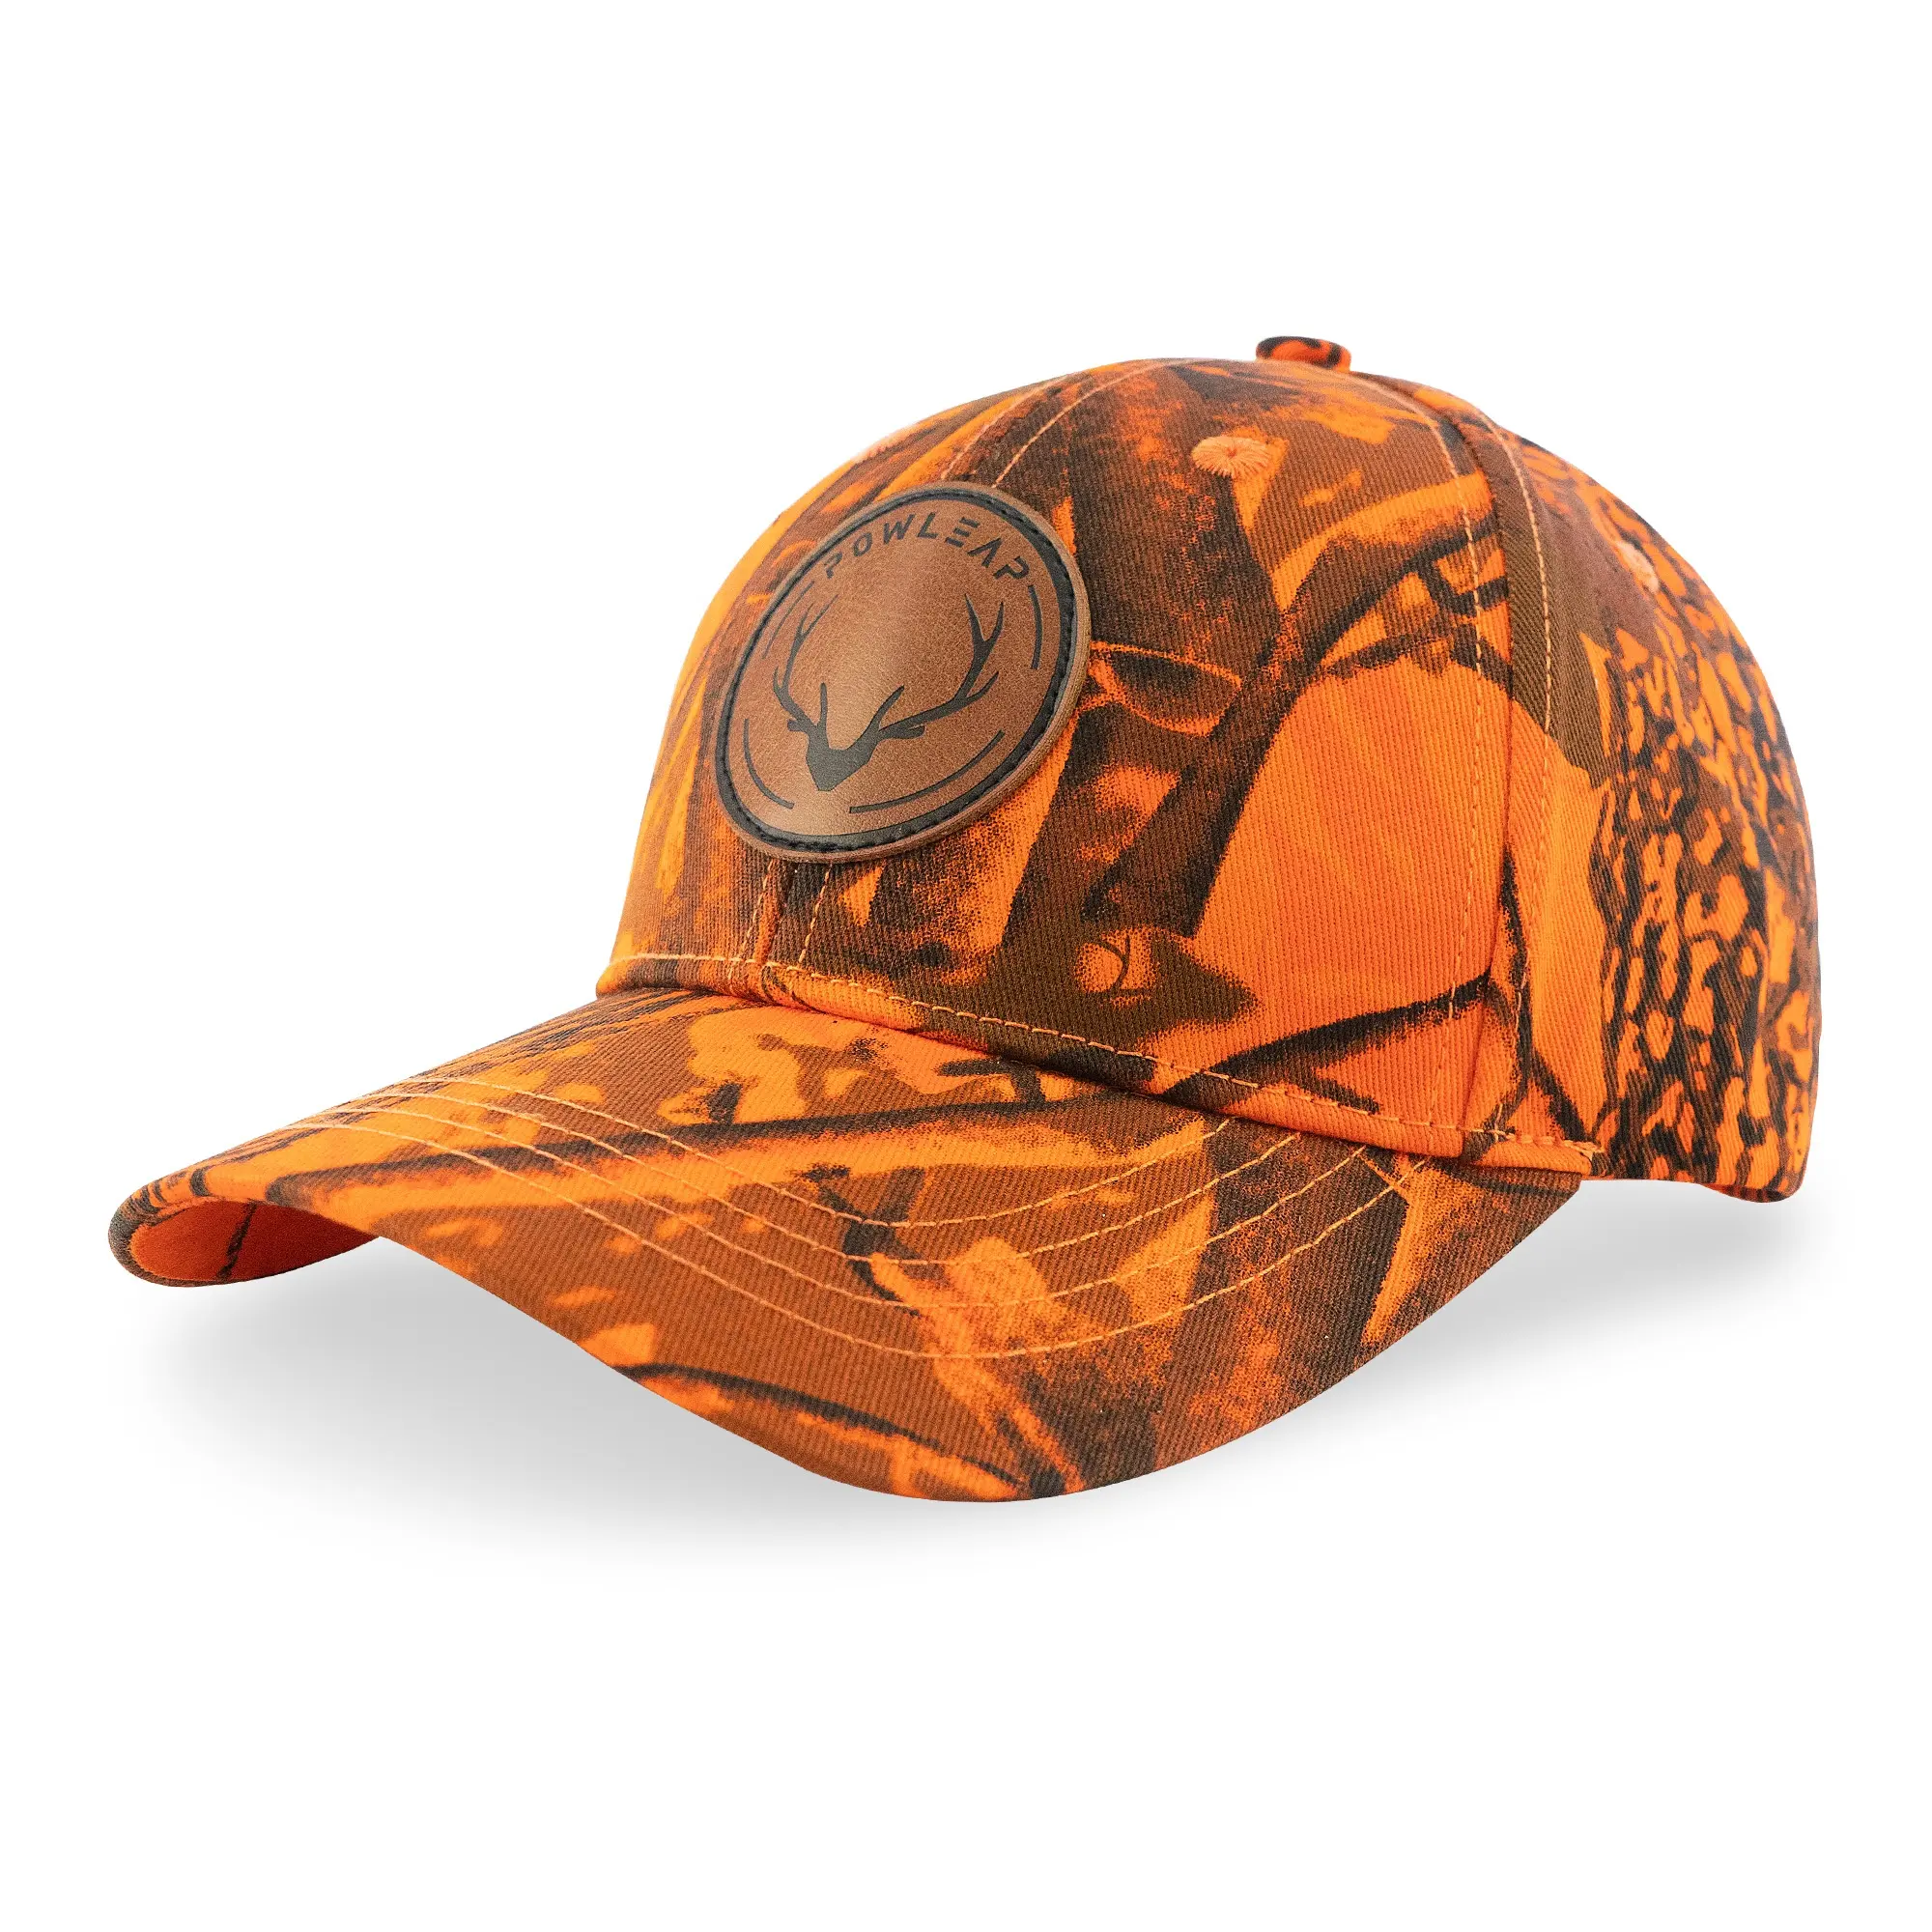 New Camo Style Outdoor Sport Hats Jungle Bionic Deer Hunting Camping Caps Cotton Caps